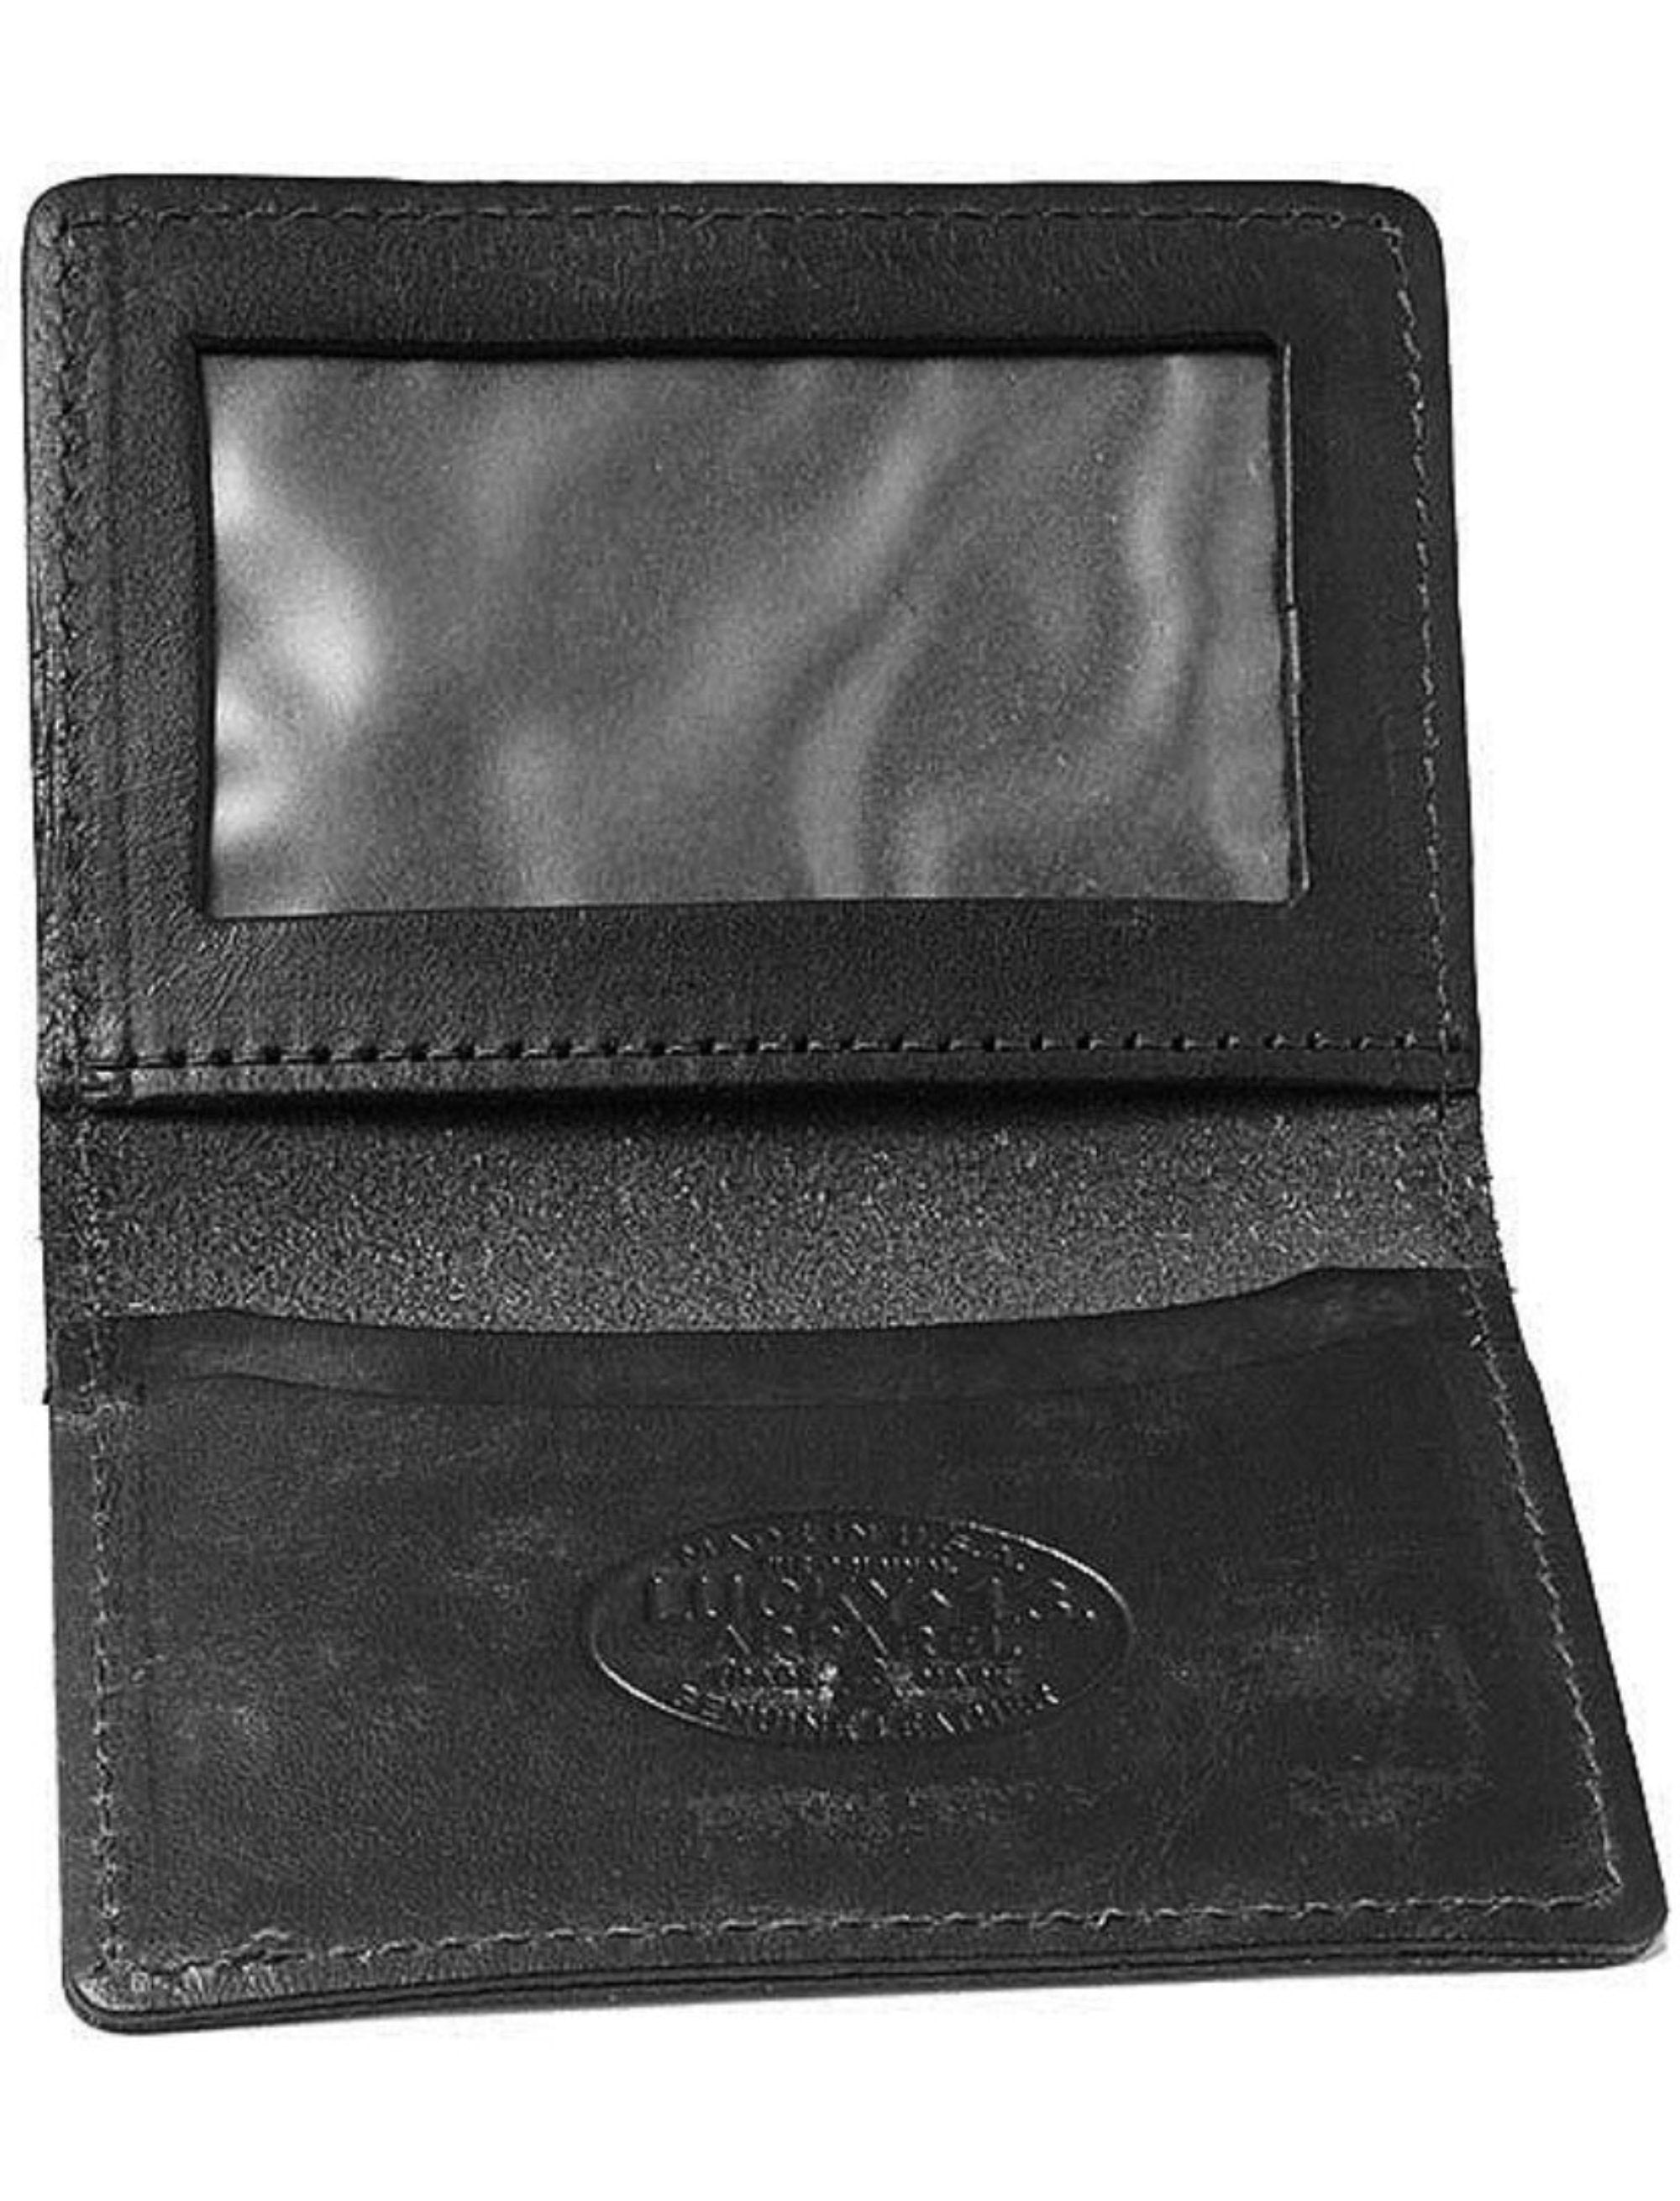 The DEATH OR GLORY Leather Card Holder Wallet - BLACK